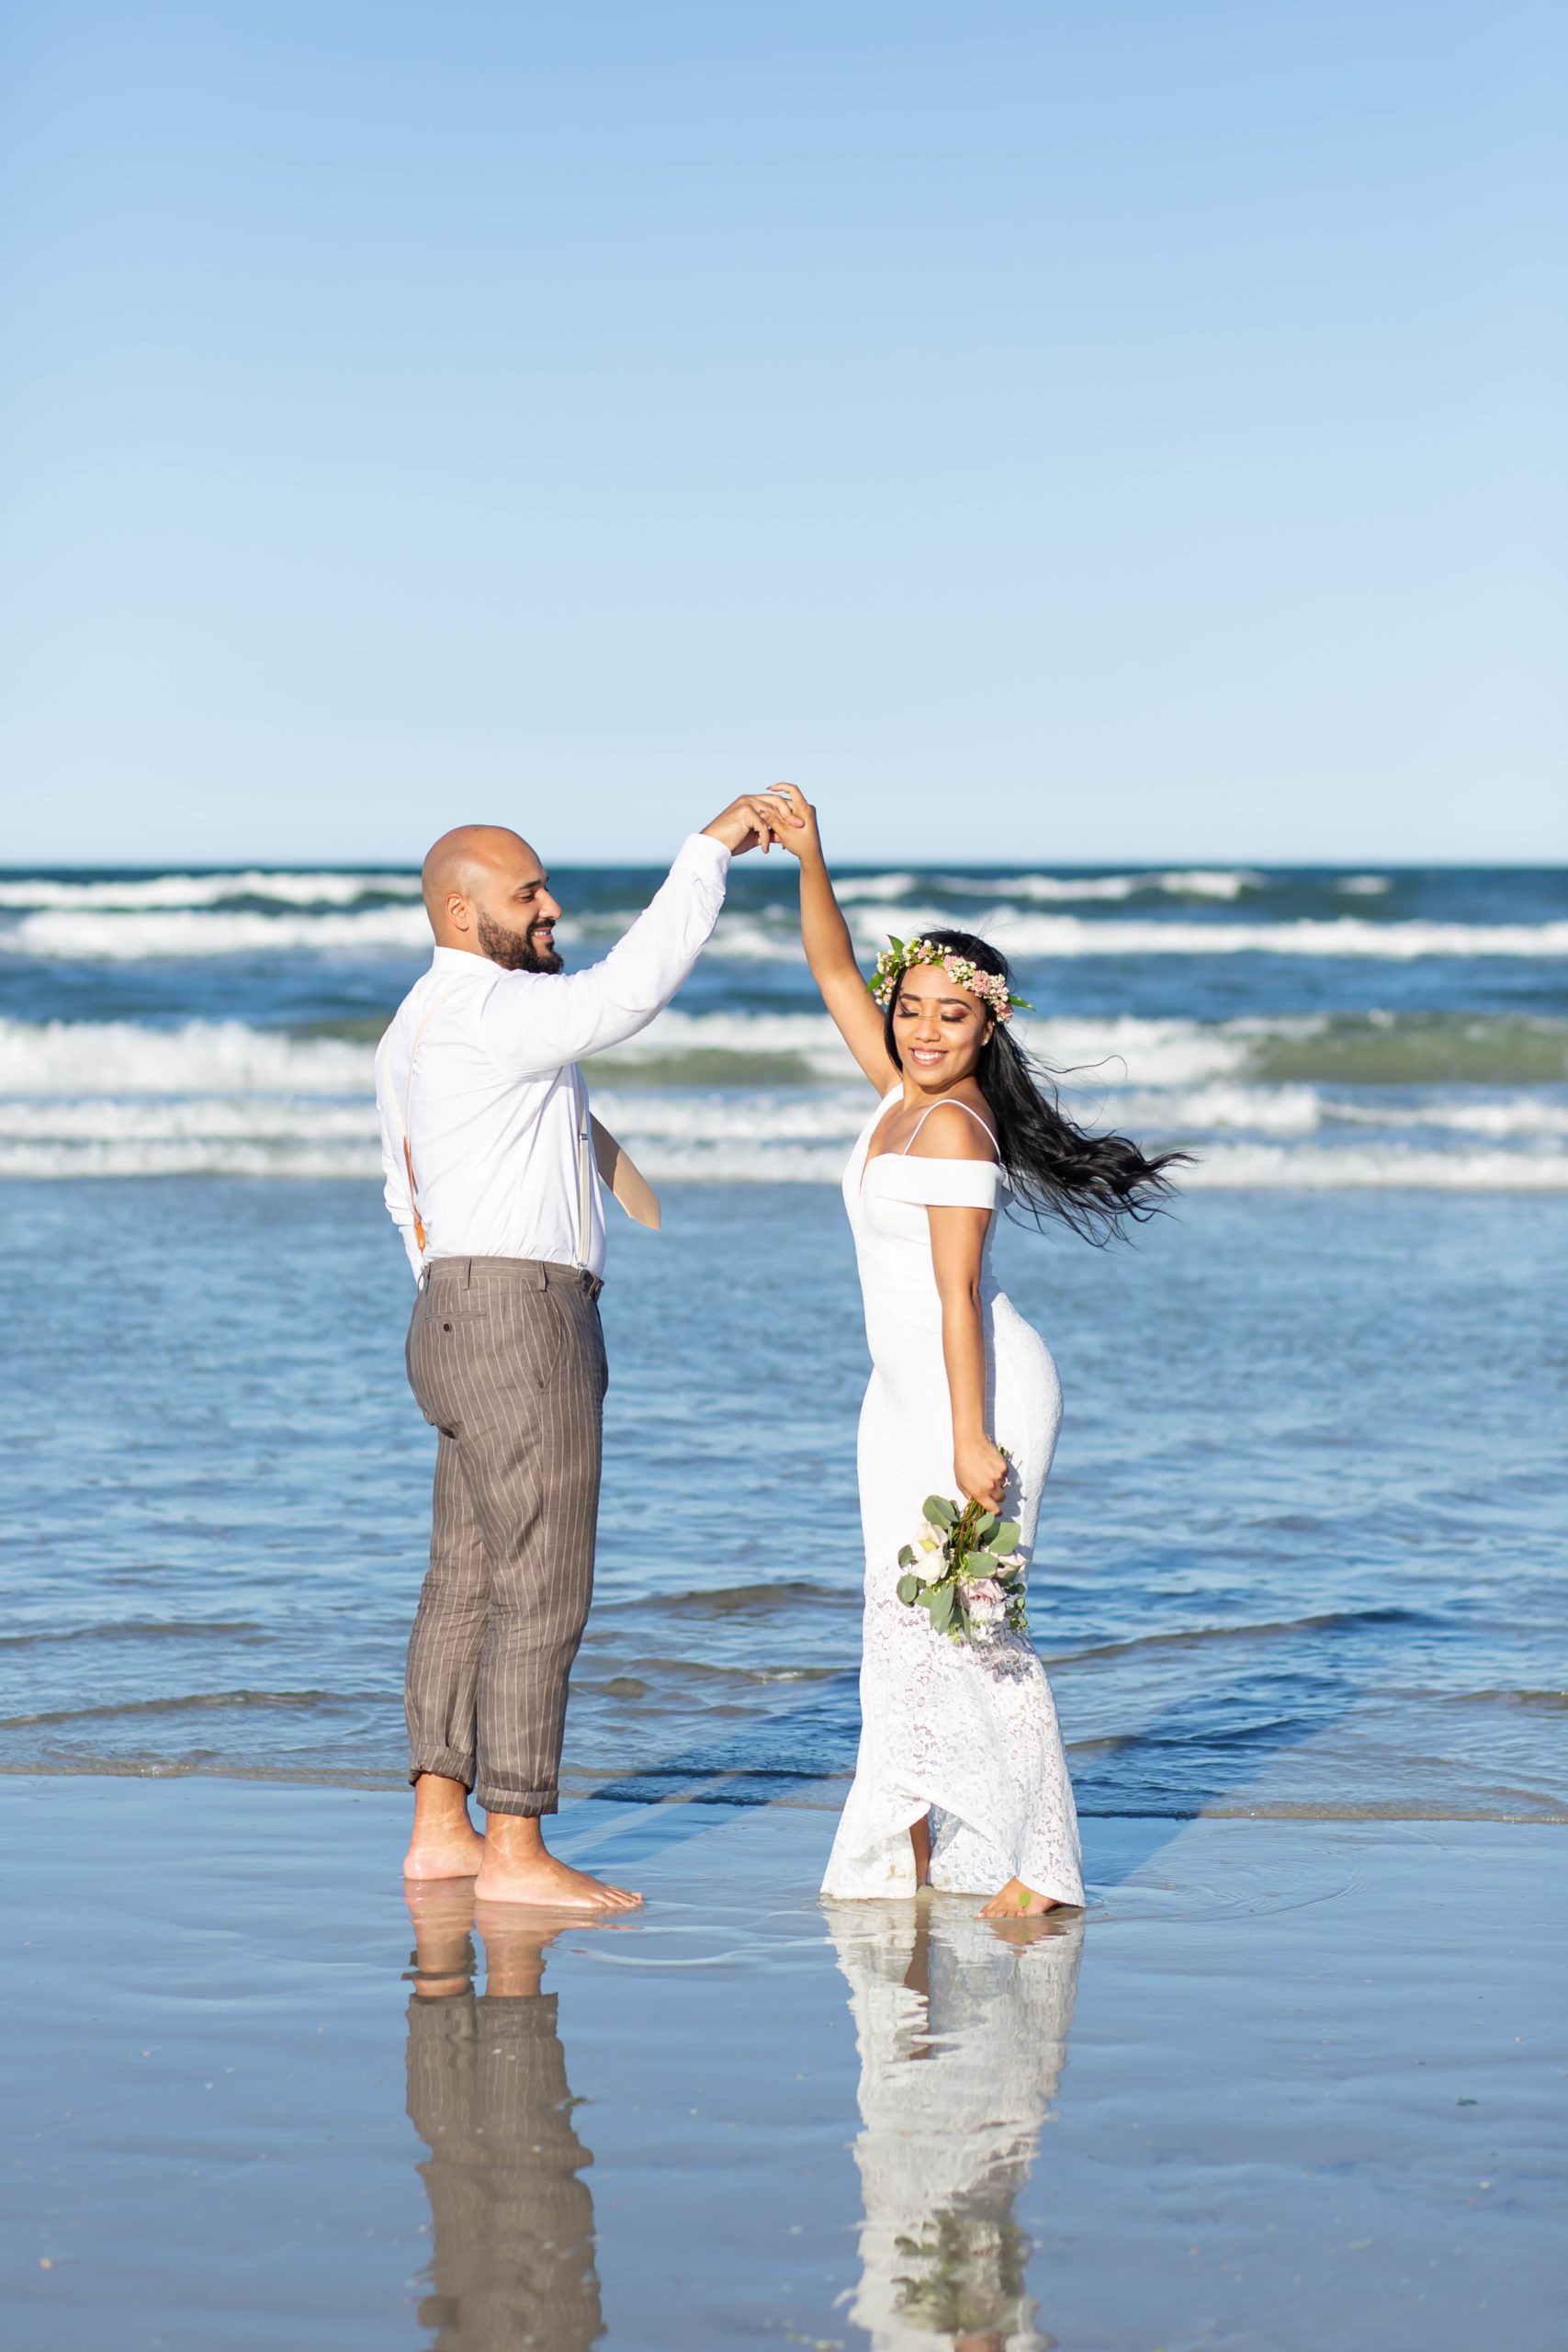 Groom twirling bride in ocean with bride wearing floral crown and petite bridal bouquet in New Smyrna Beach, FL